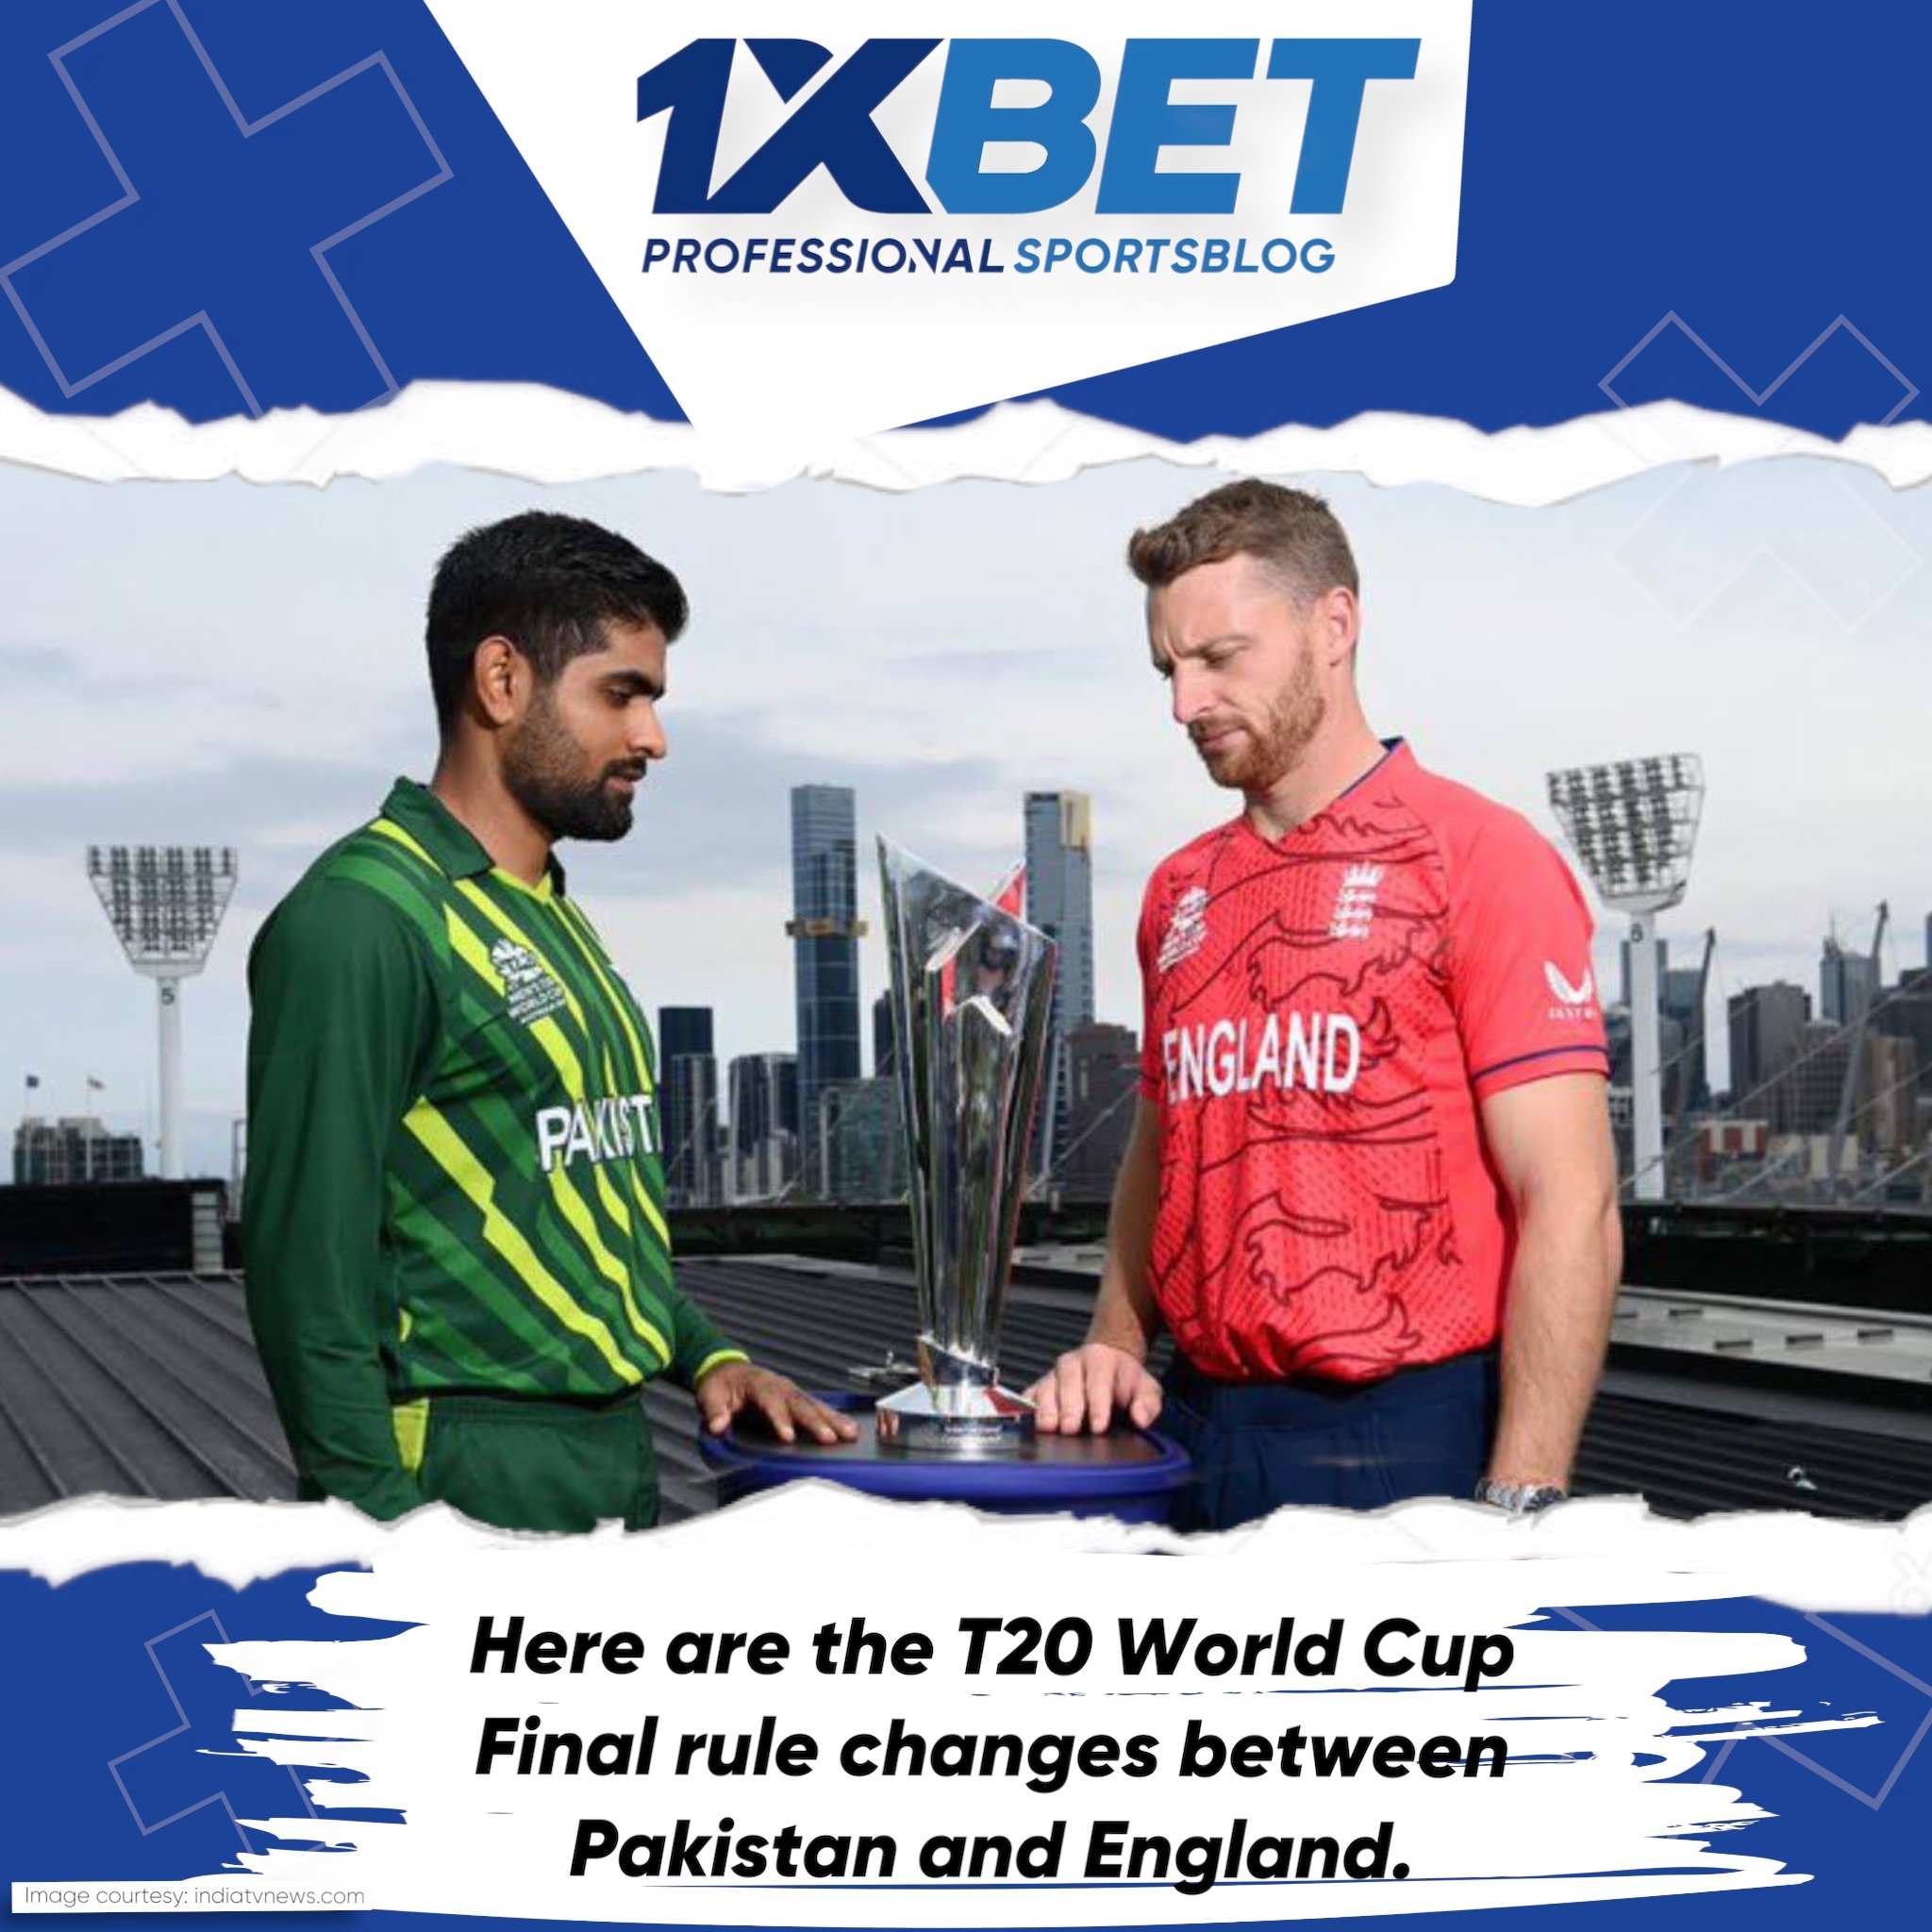 Here are the T20 World Cup Final rule changes between Pakistan and England